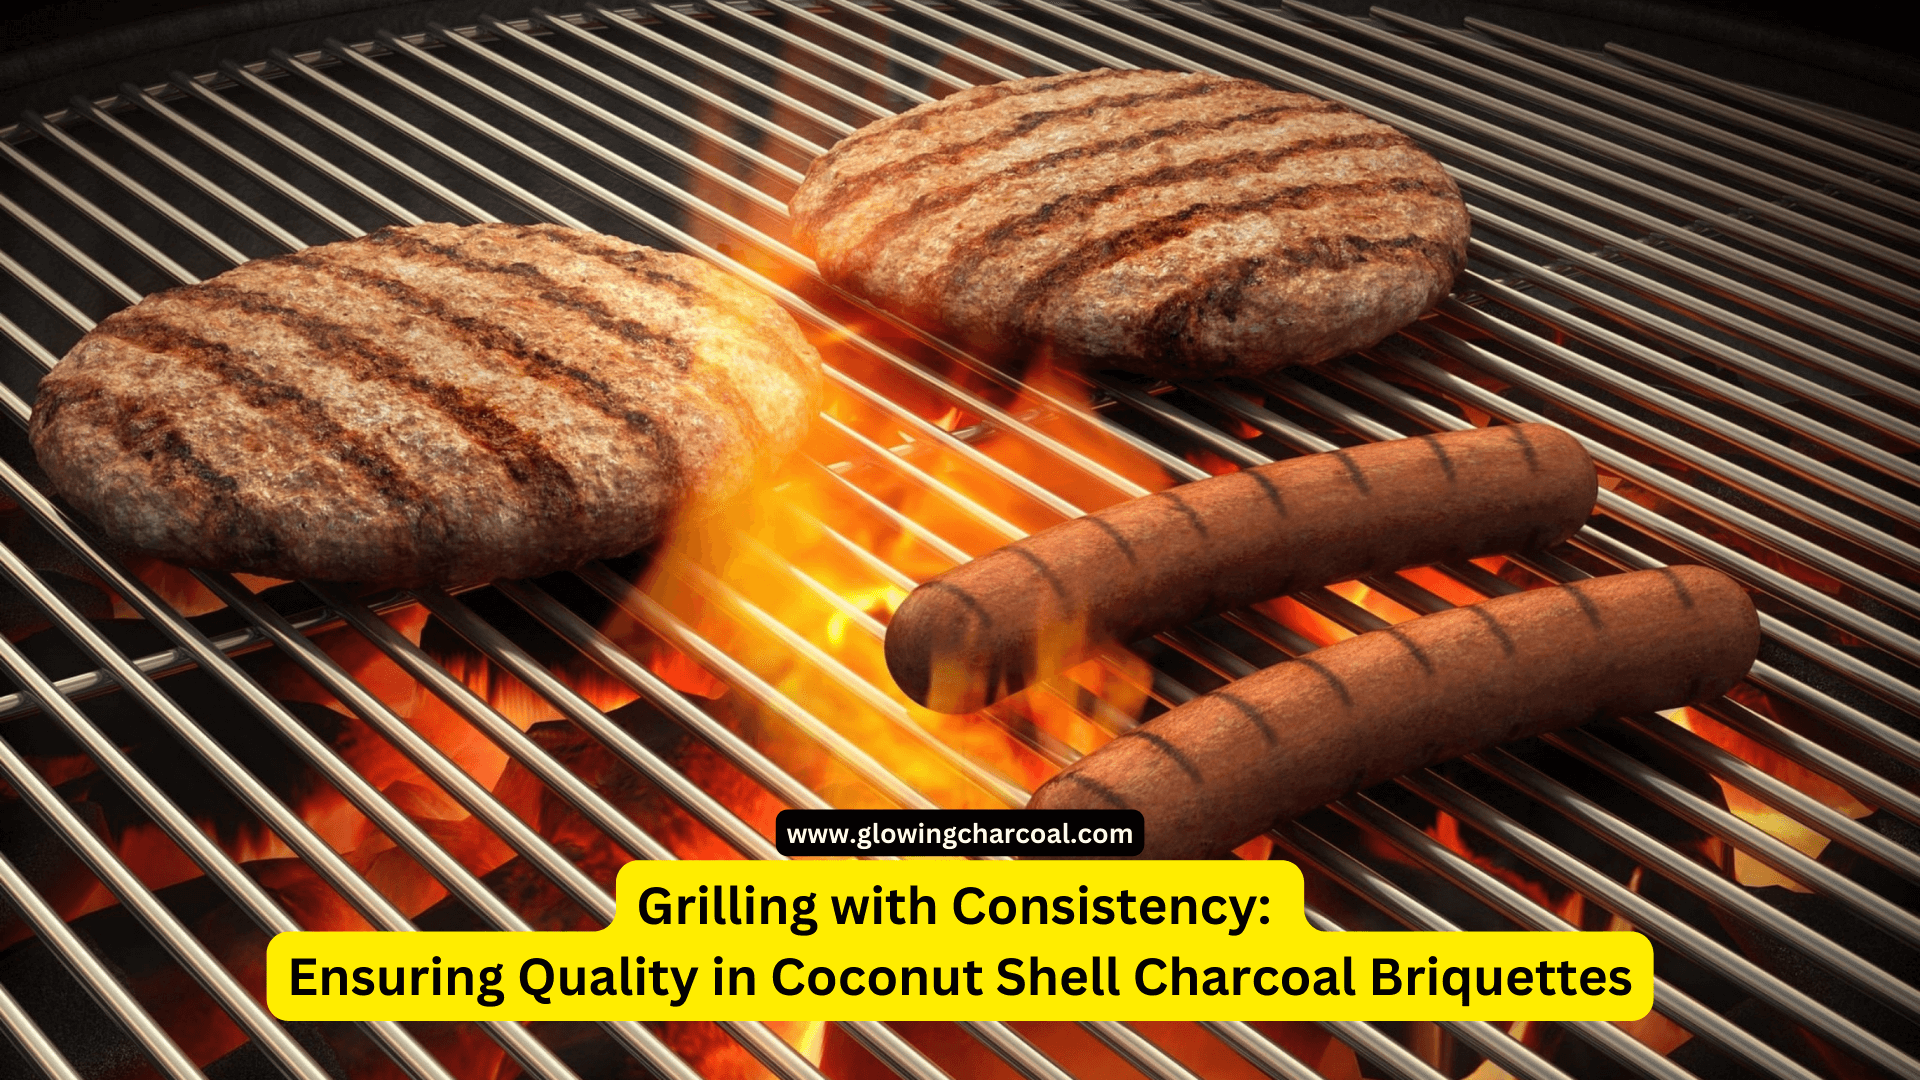 Grilling with Consistency: Ensuring Quality in Coconut Shell Charcoal Briquettes